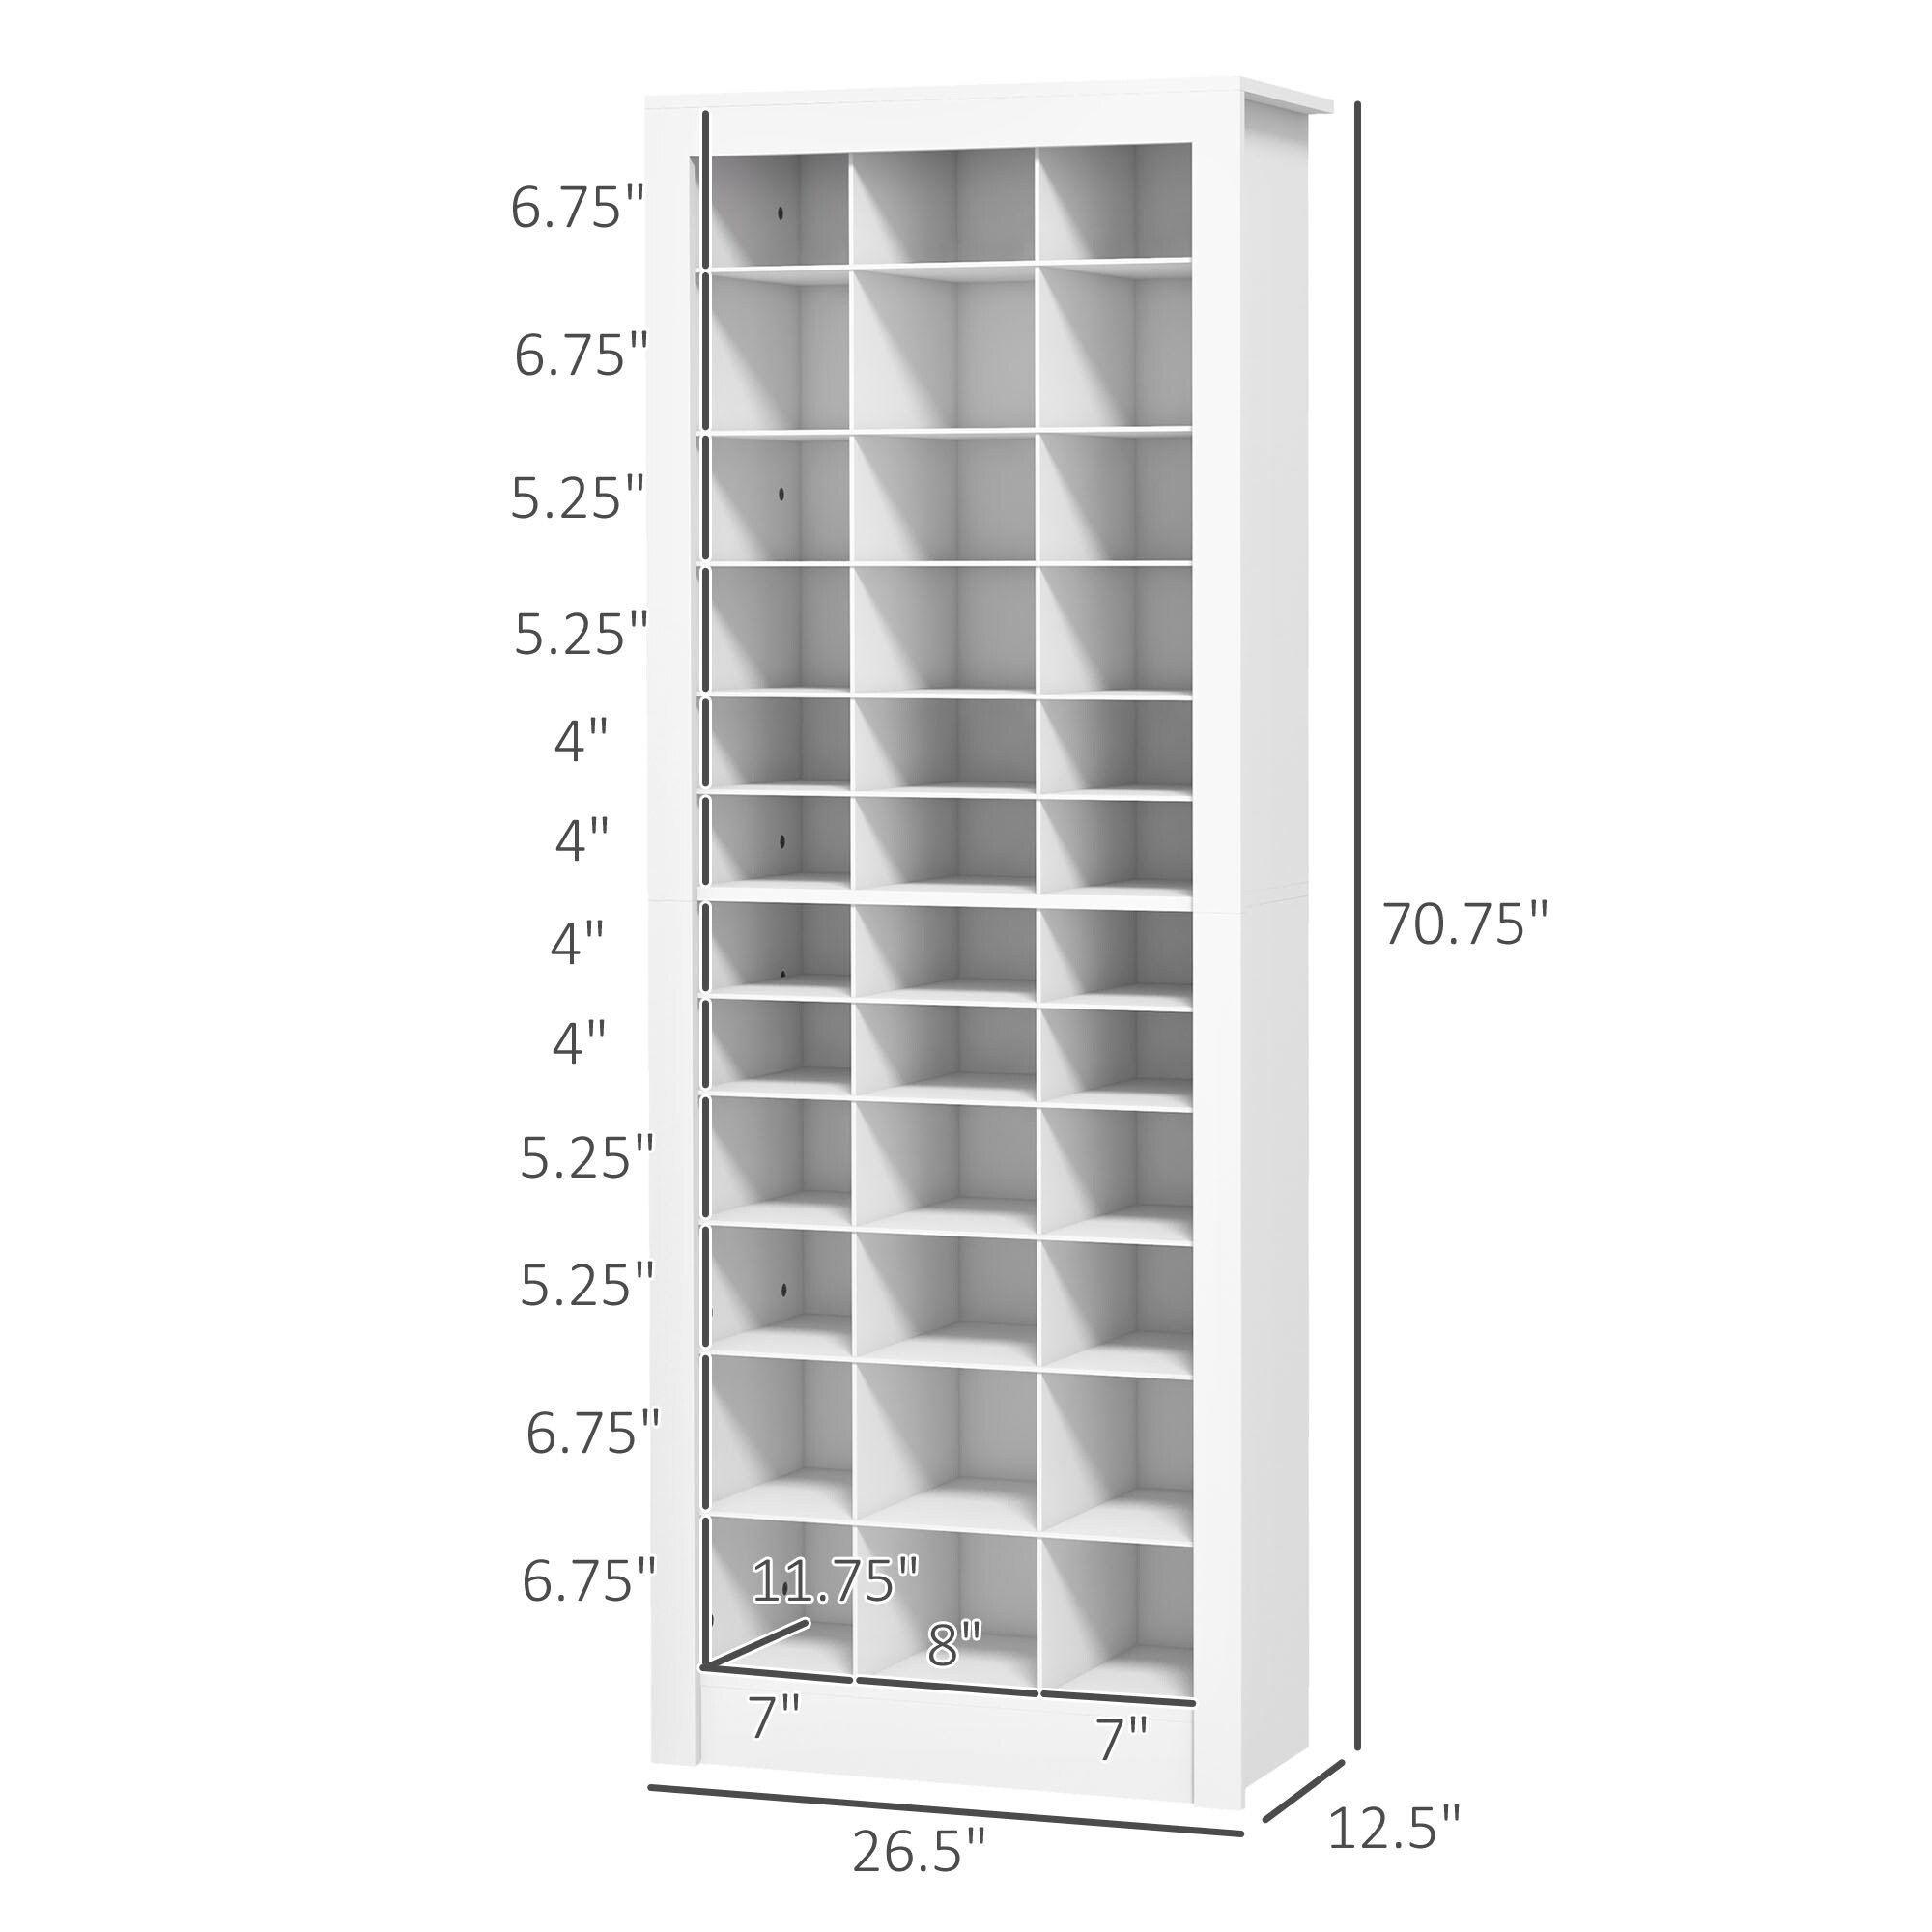 https://ak1.ostkcdn.com/images/products/is/images/direct/7078ea97326559d6c810551cf2dd961eb43842b2/HOMCOM-71%22-Tall-Shoe-Cabinet-for-Entryway%2C-Narrow-Shoe-Rack-Storage-Organizer%2C-White.jpg